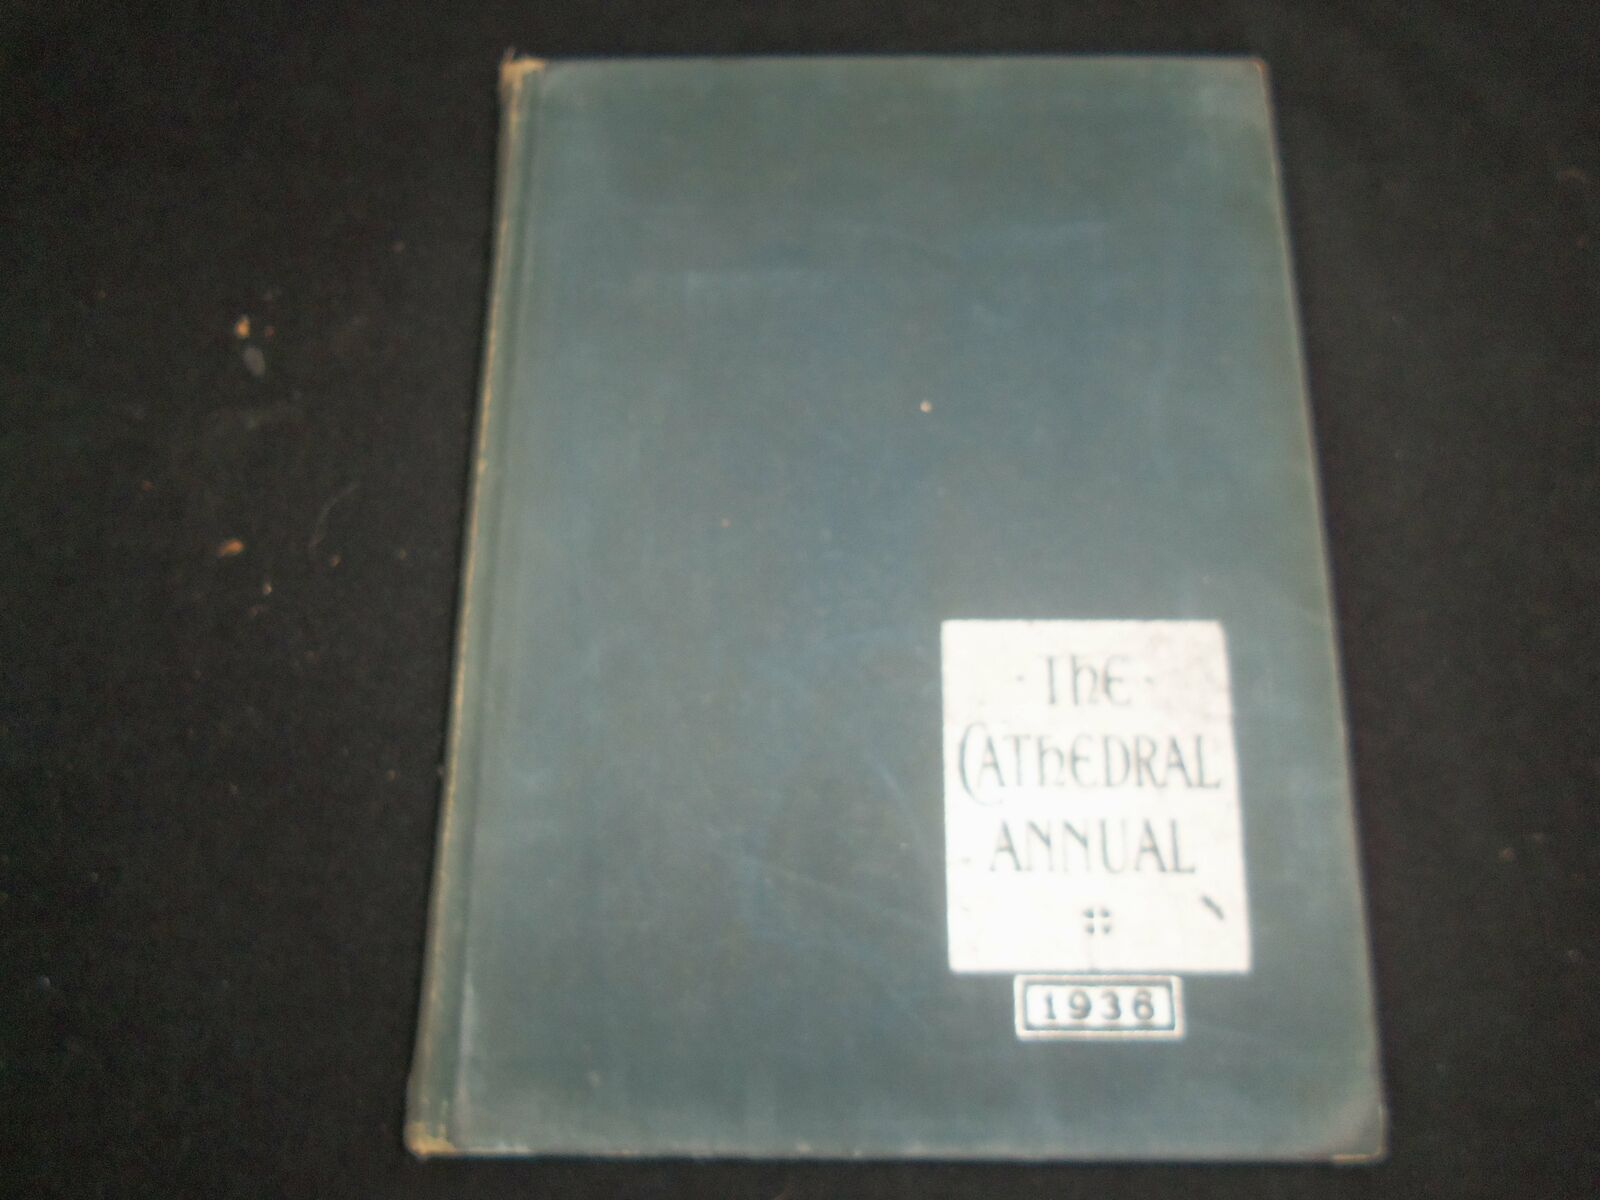 1936 CATHEDRAL COLLEGE OF IMMACULATE CONCEPTION YEARBOOK - BROOKLYN, NY- YB 2524